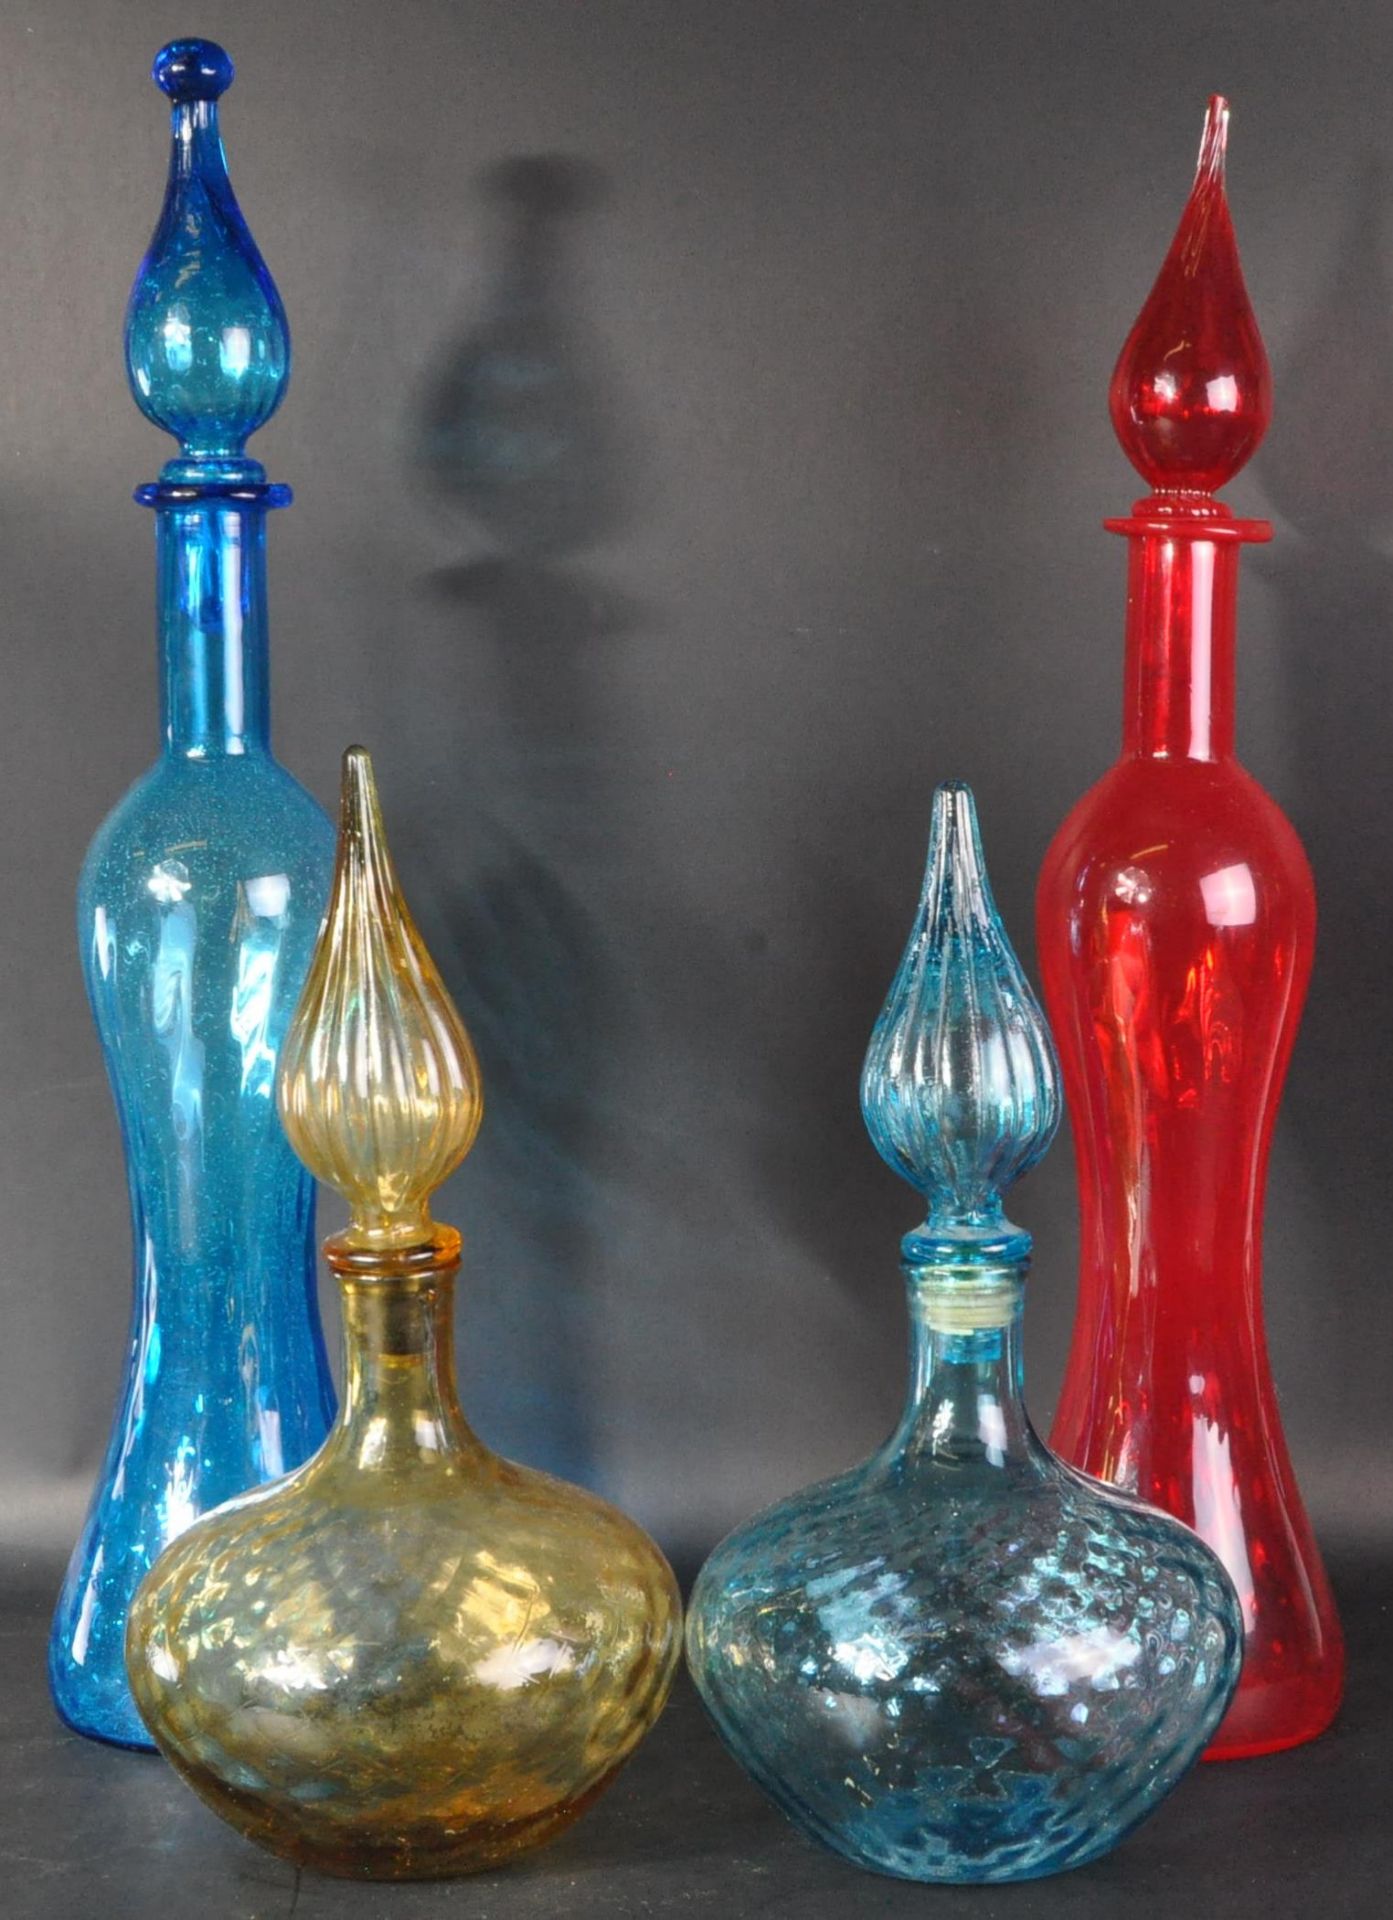 EMPOLI - GENIE BOTTLES - COLLECTION OF FOUR GLASS DECANTERS